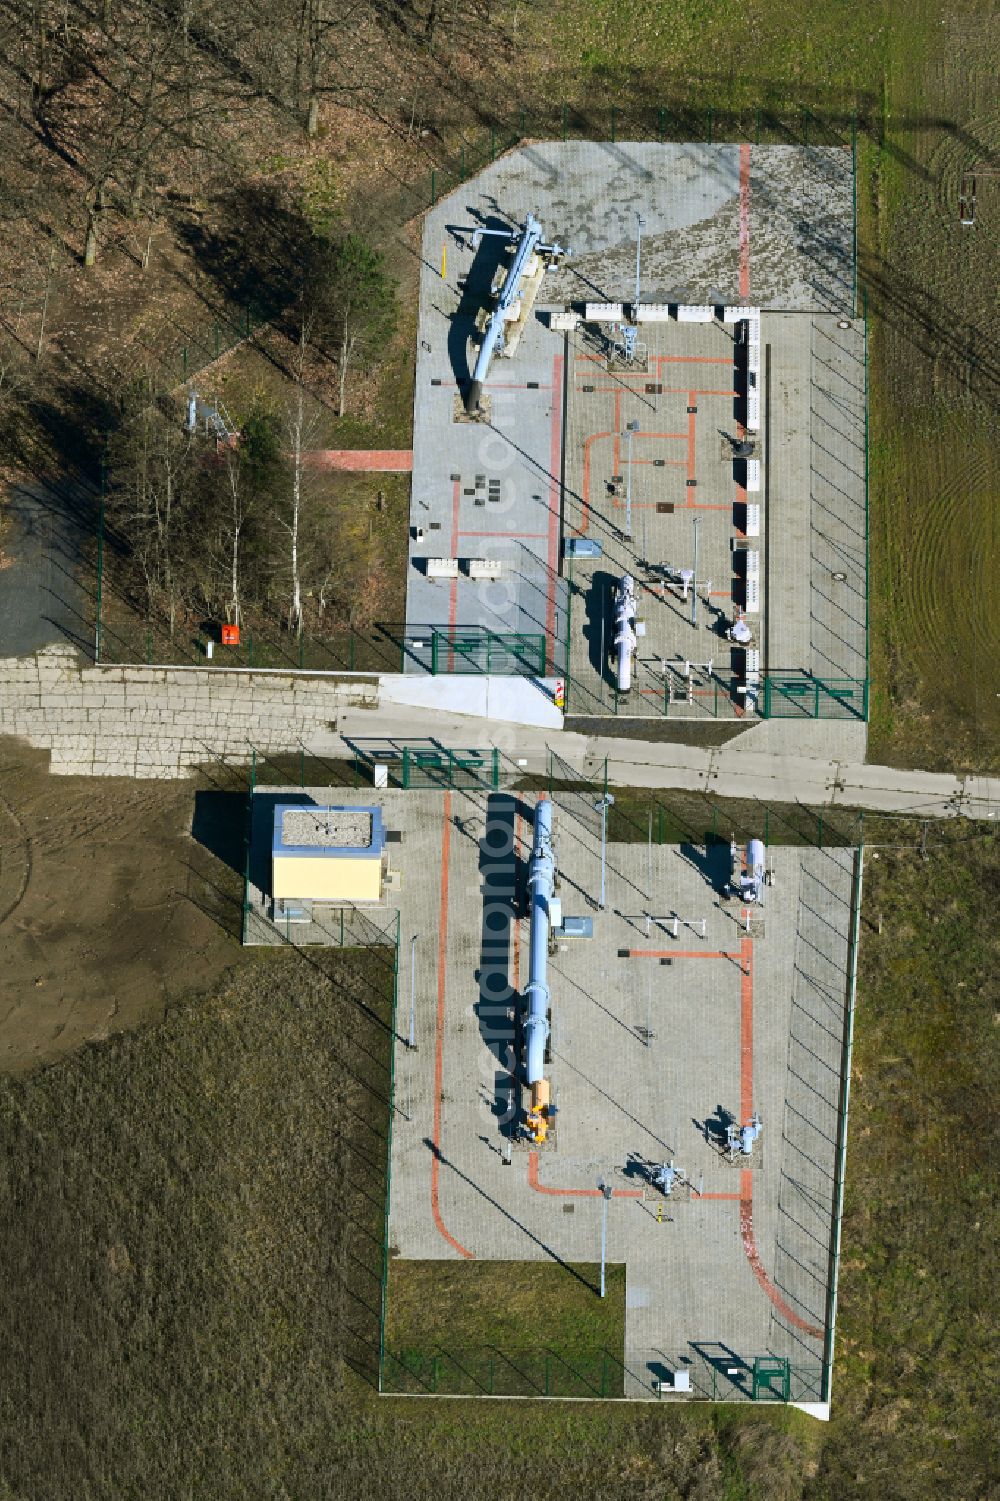 Aerial photograph Börnicke - Compressor Stadium and pumping station for natural gas of company ONTRAS on street Am Kiefernweg in Boernicke in the state Brandenburg, Germany